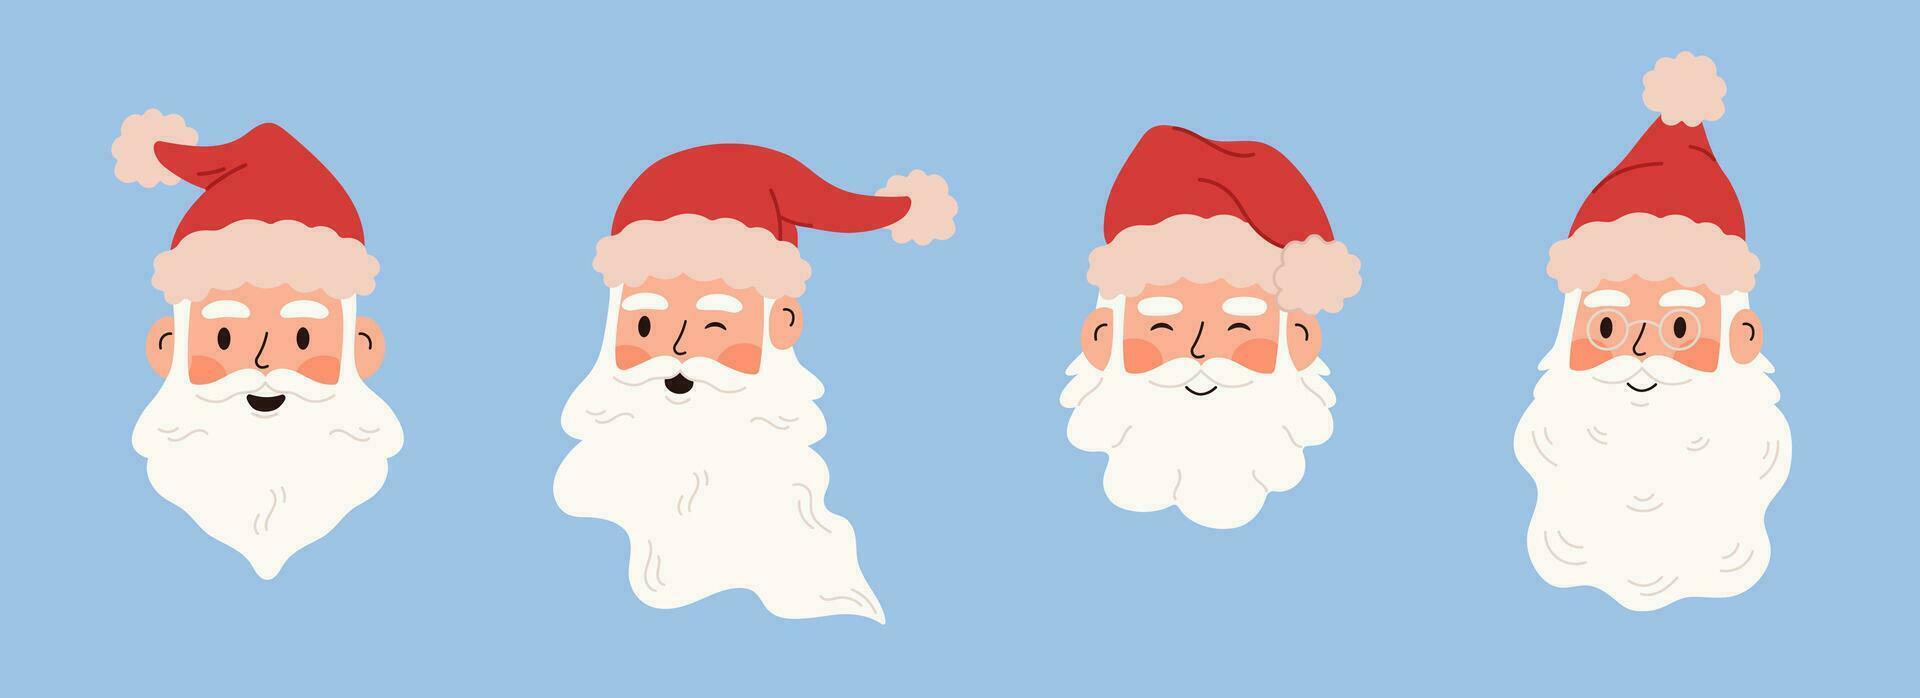 Set with different faces of Santa Claus. Santa in a hat, santa beard, santa in glasses. The character winks, smiles, laughs. Isolated design elements. Hand drawn flat illustration. vector